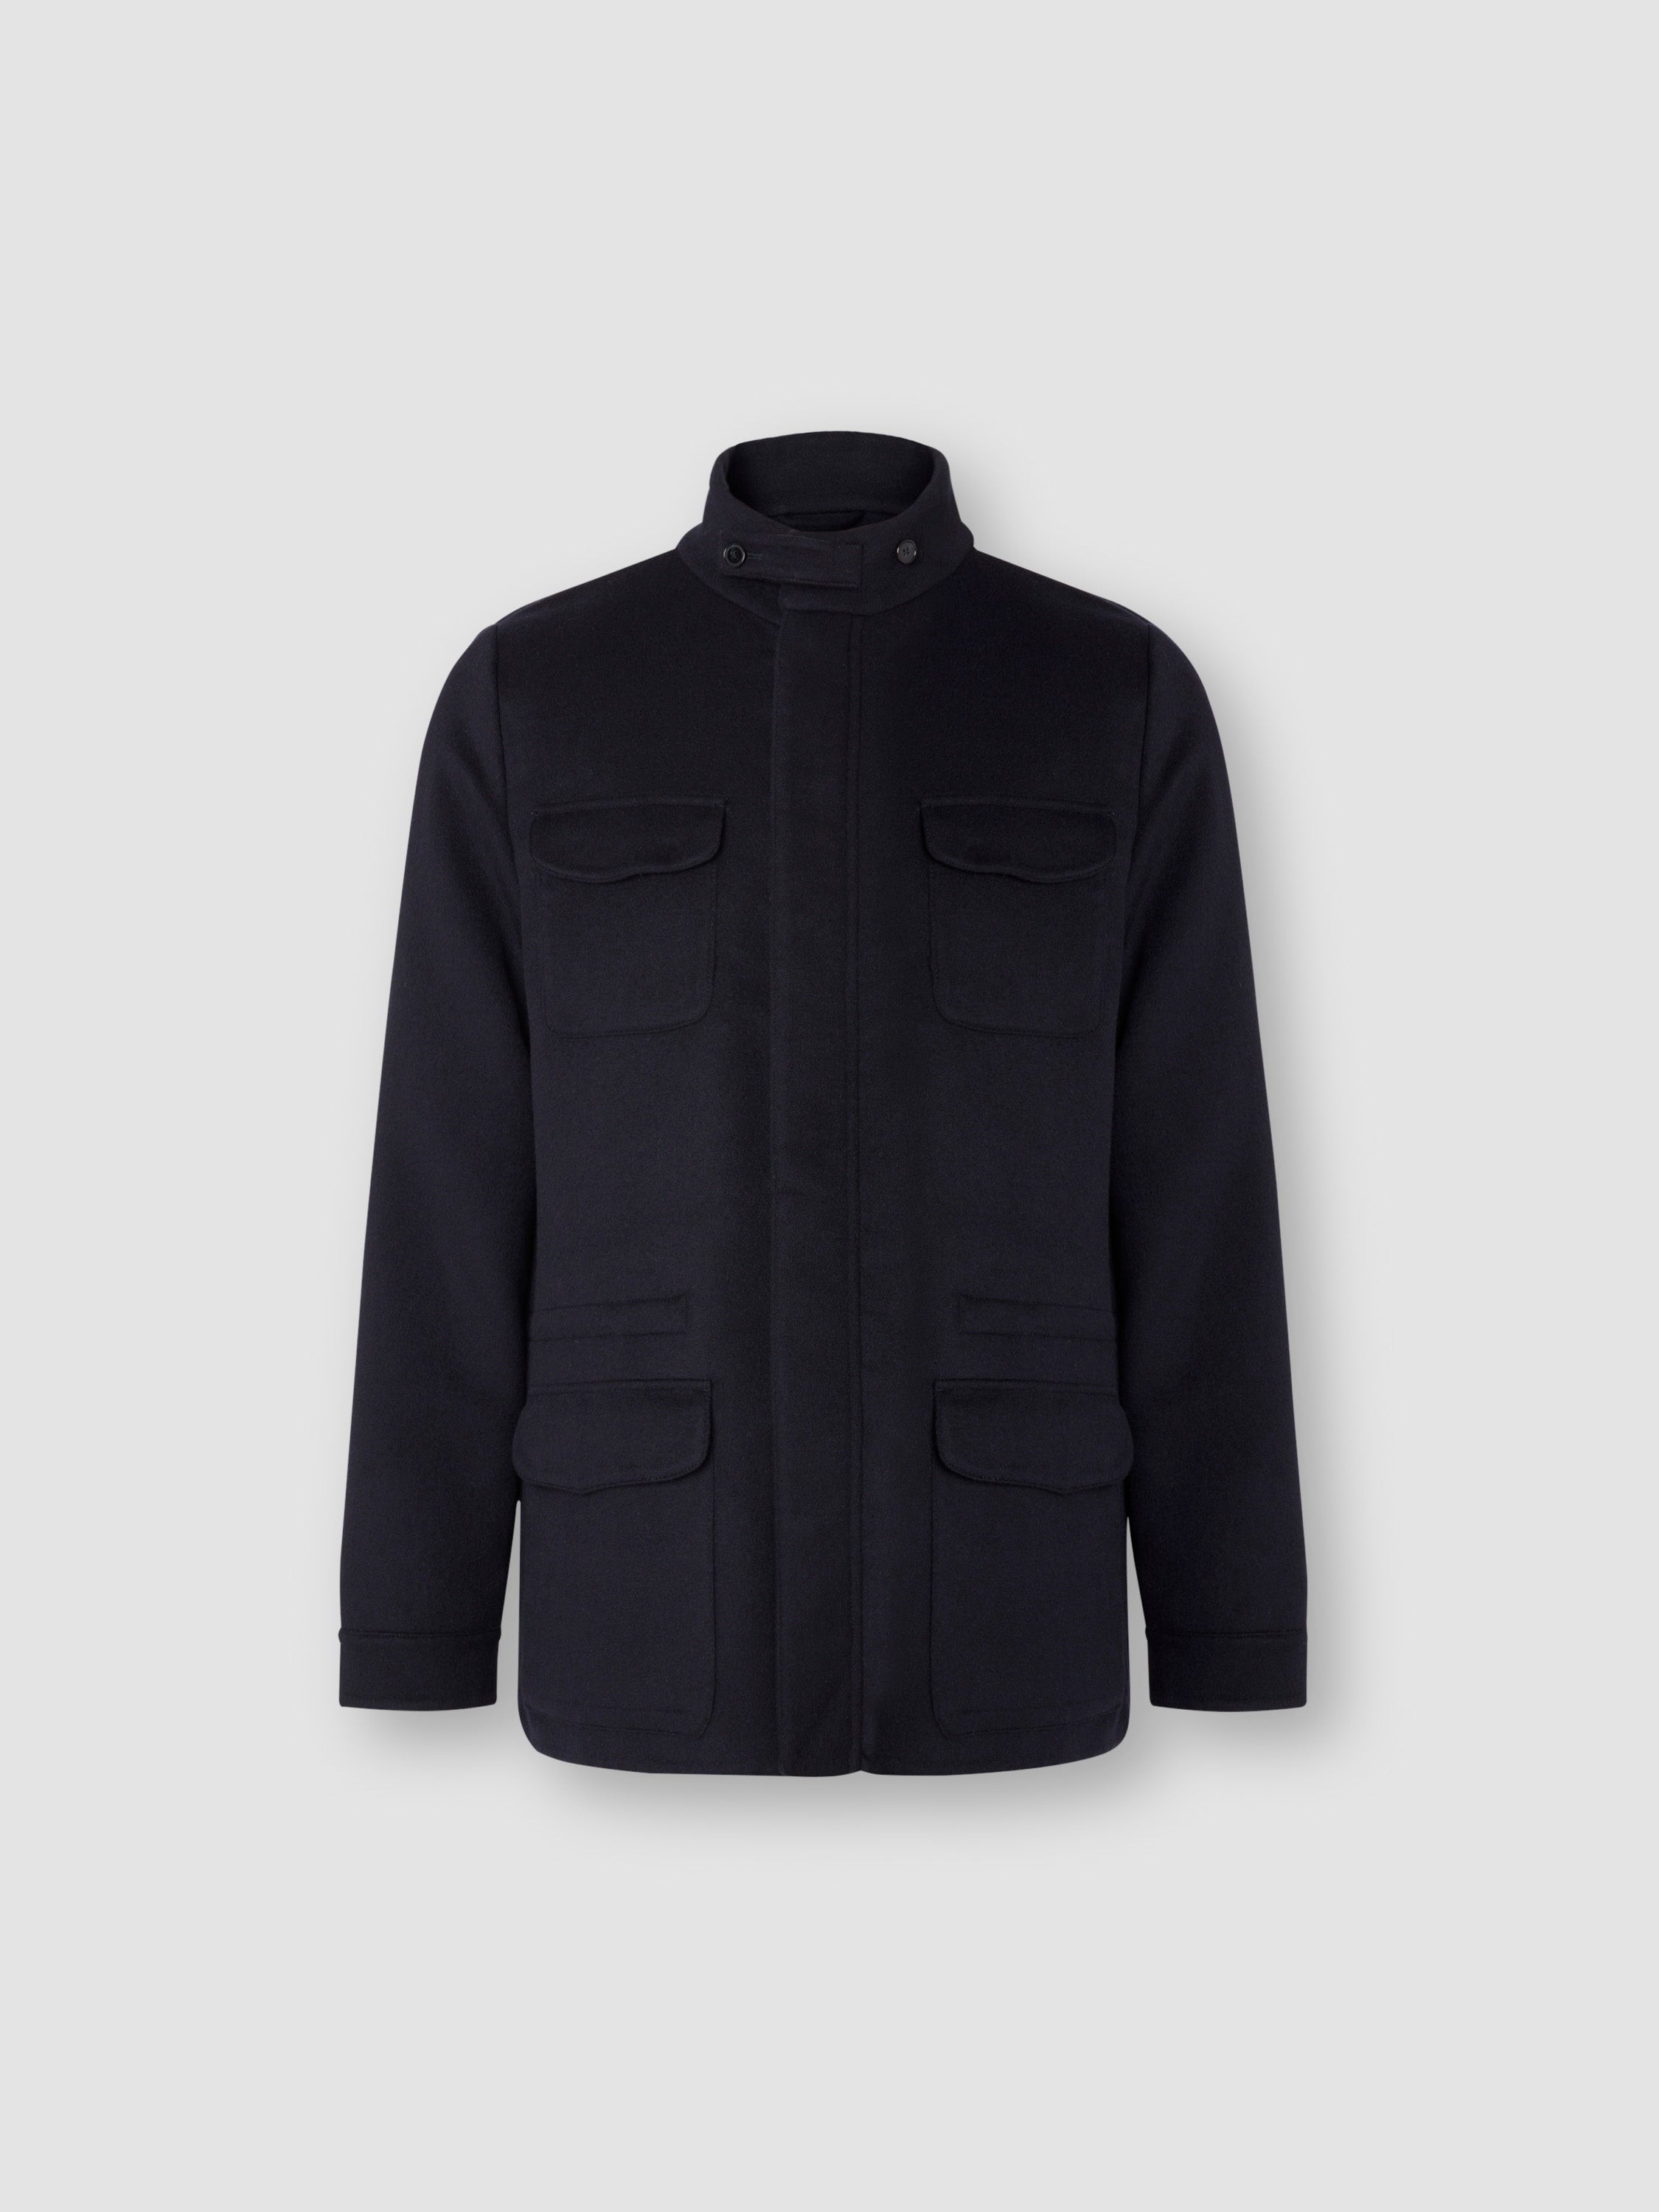 Wool Cashmere Car Coat Navy Product Image